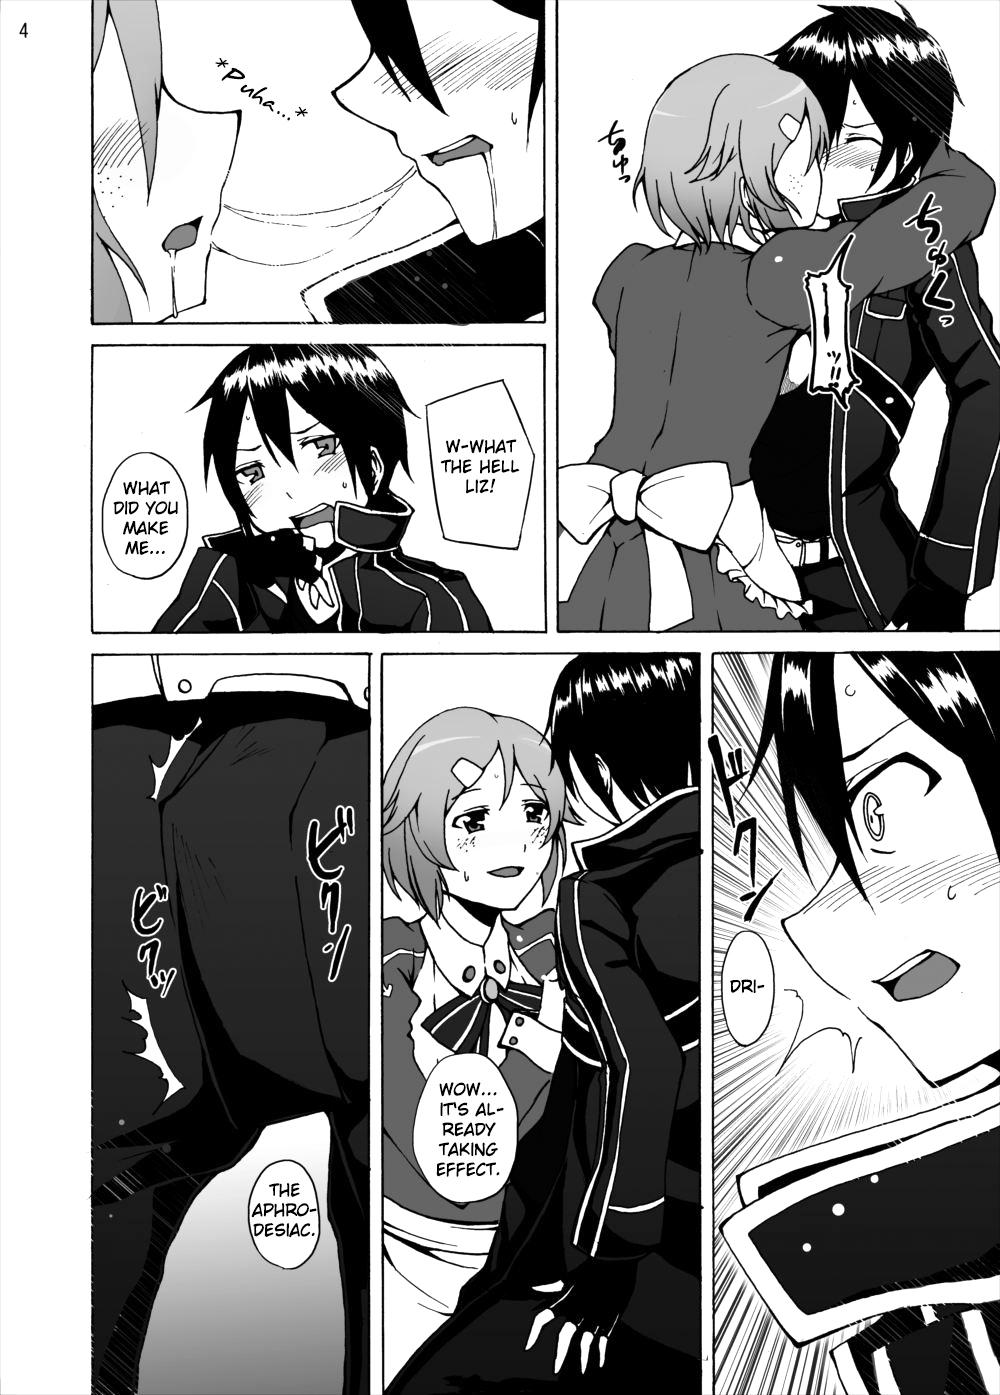 Blackcocks Lisbeth's Decision...To Steal Kirito From Asuna Even if She Has to Use a Dangerous Drug - Sword art online Old Vs Young - Page 4